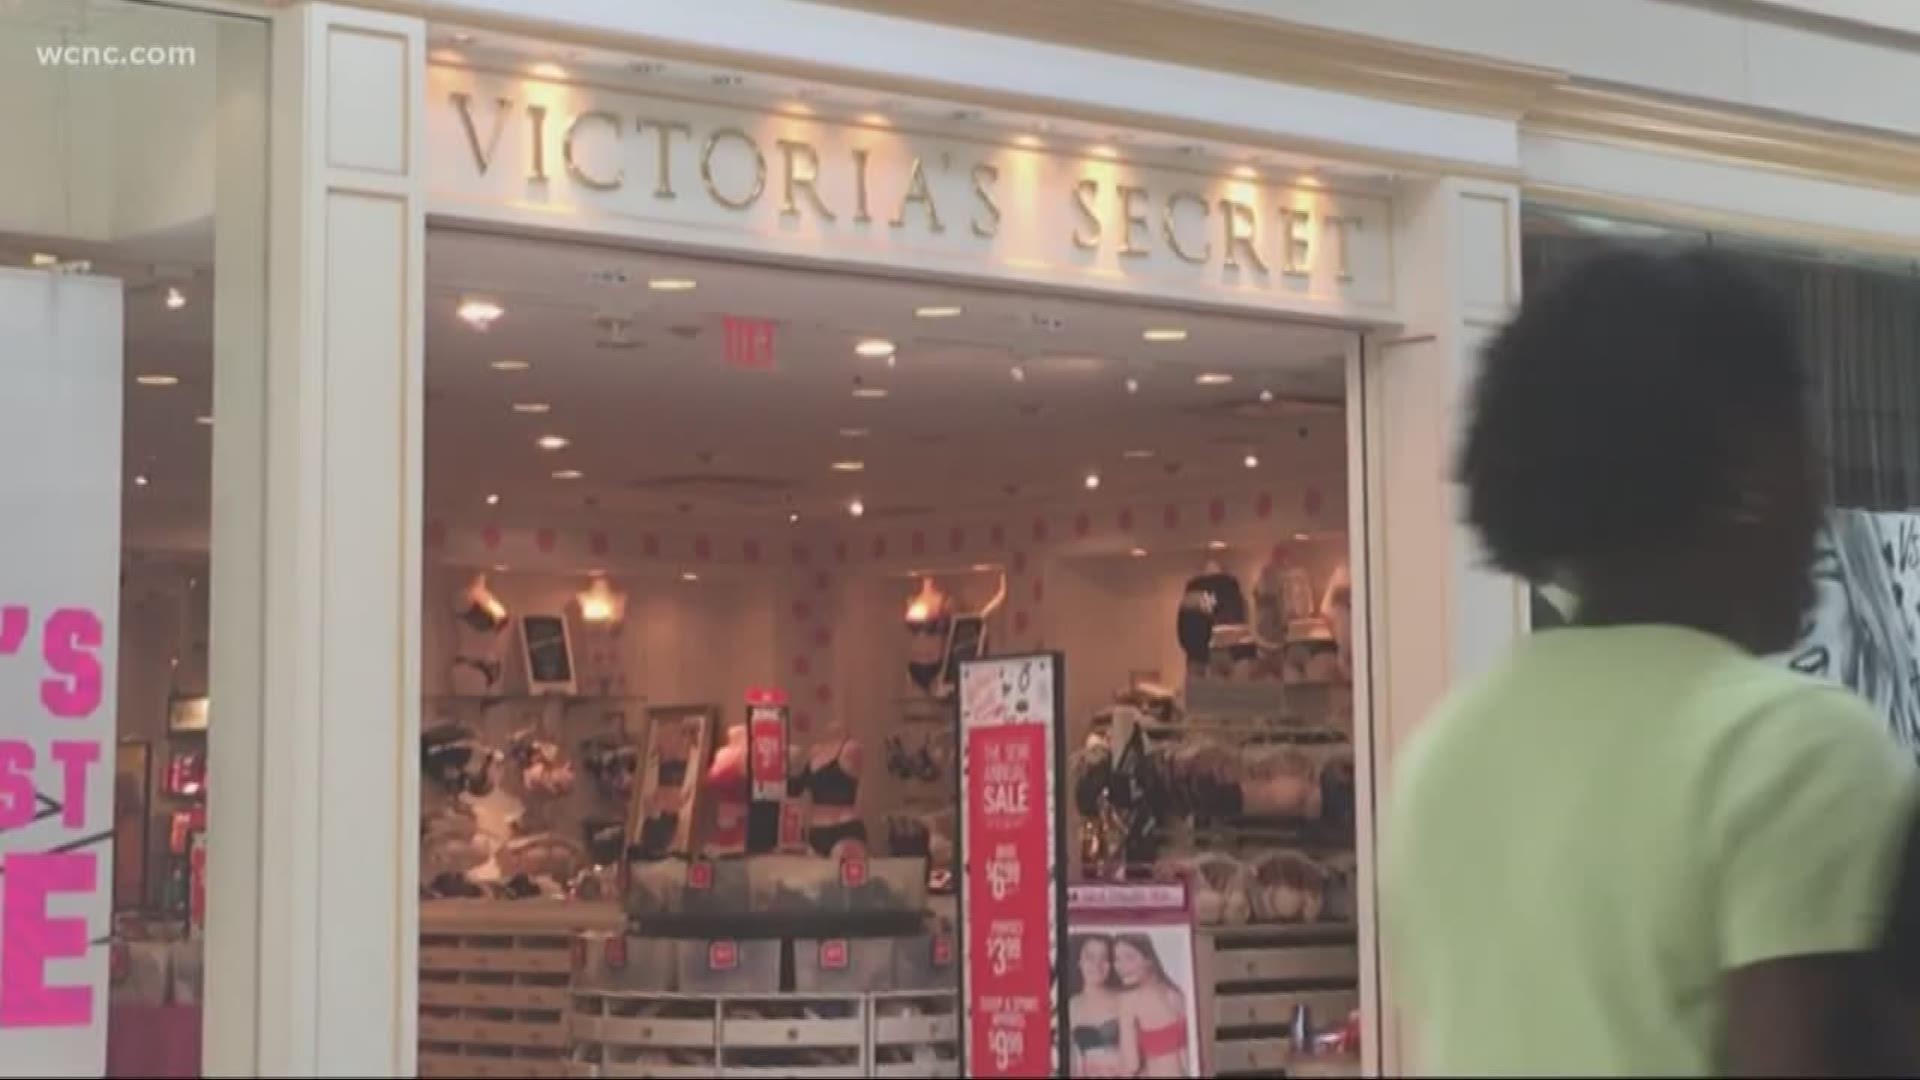 A Victoria's Secret in Rock Hill was robbed of roughly $1700 worth of underwear.